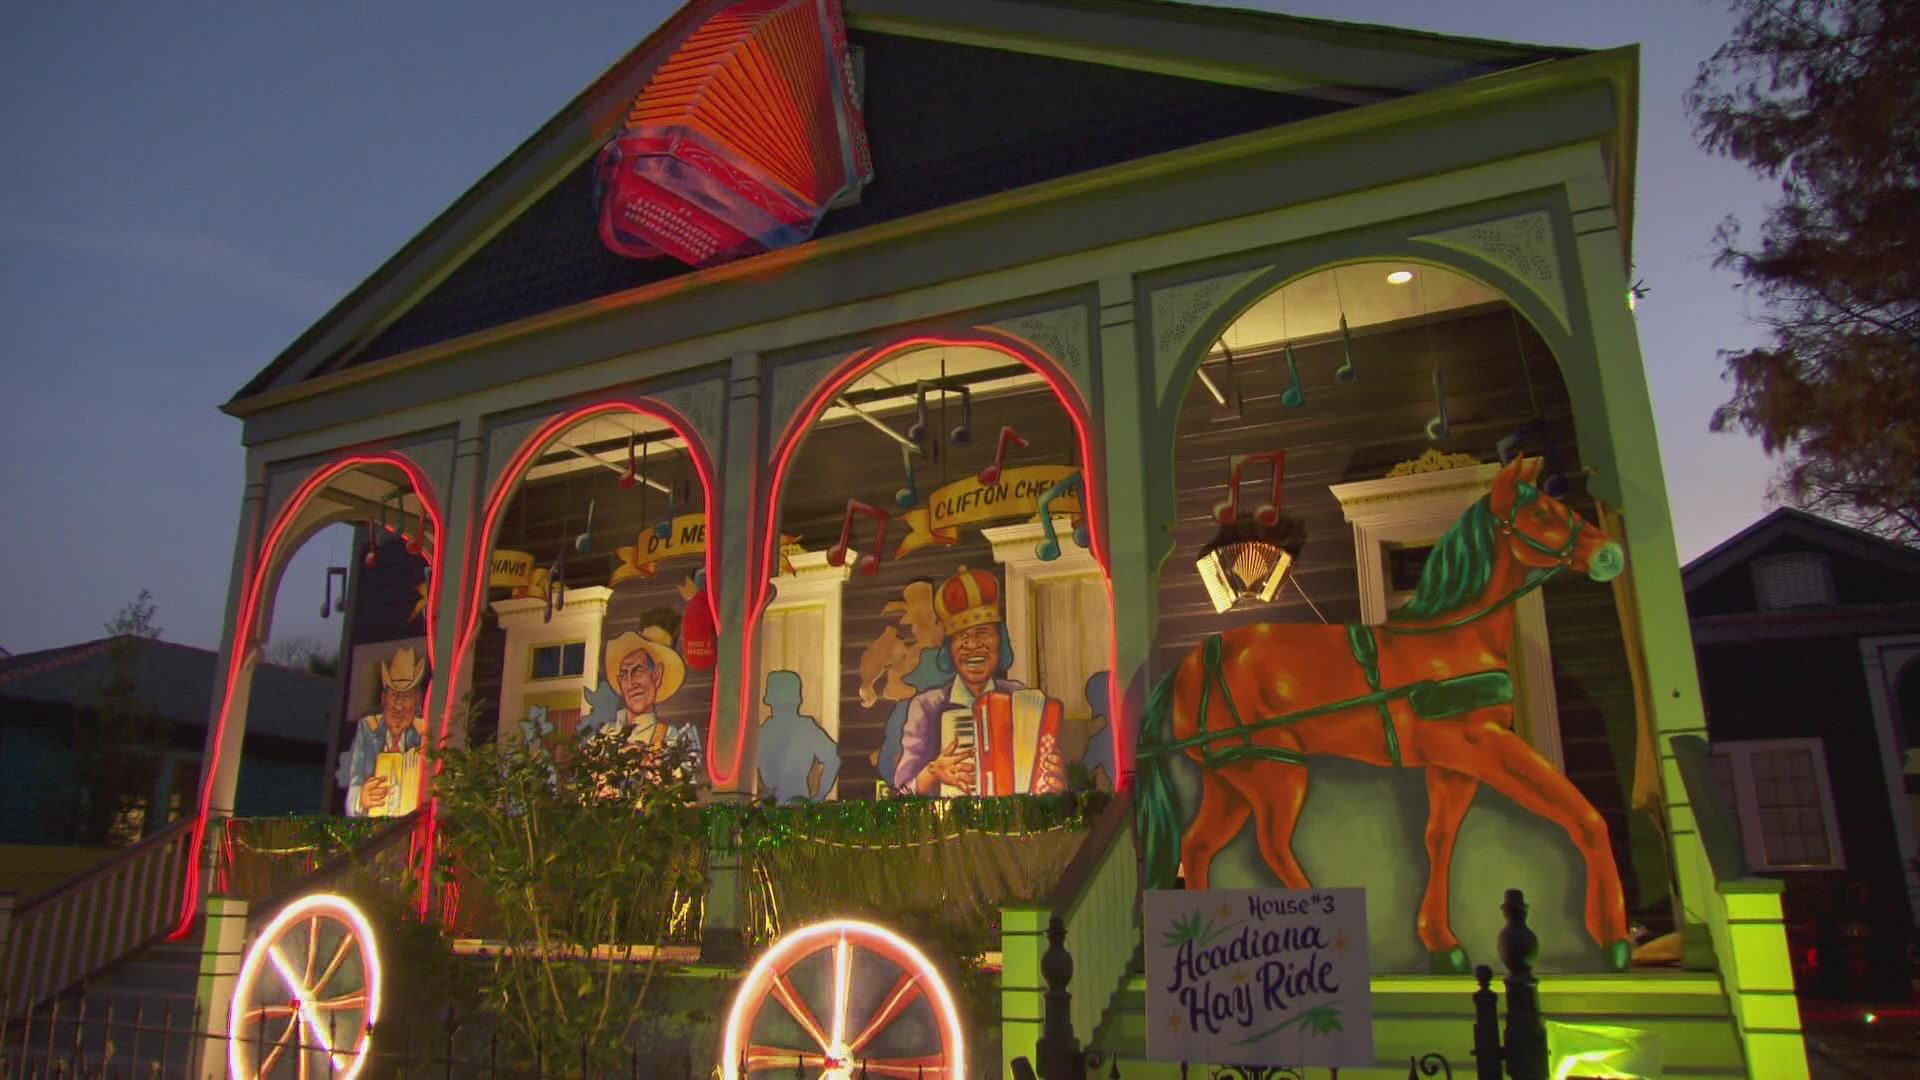 House floats will be making a return for the Mardi Grass 2022 as parades are set to roll